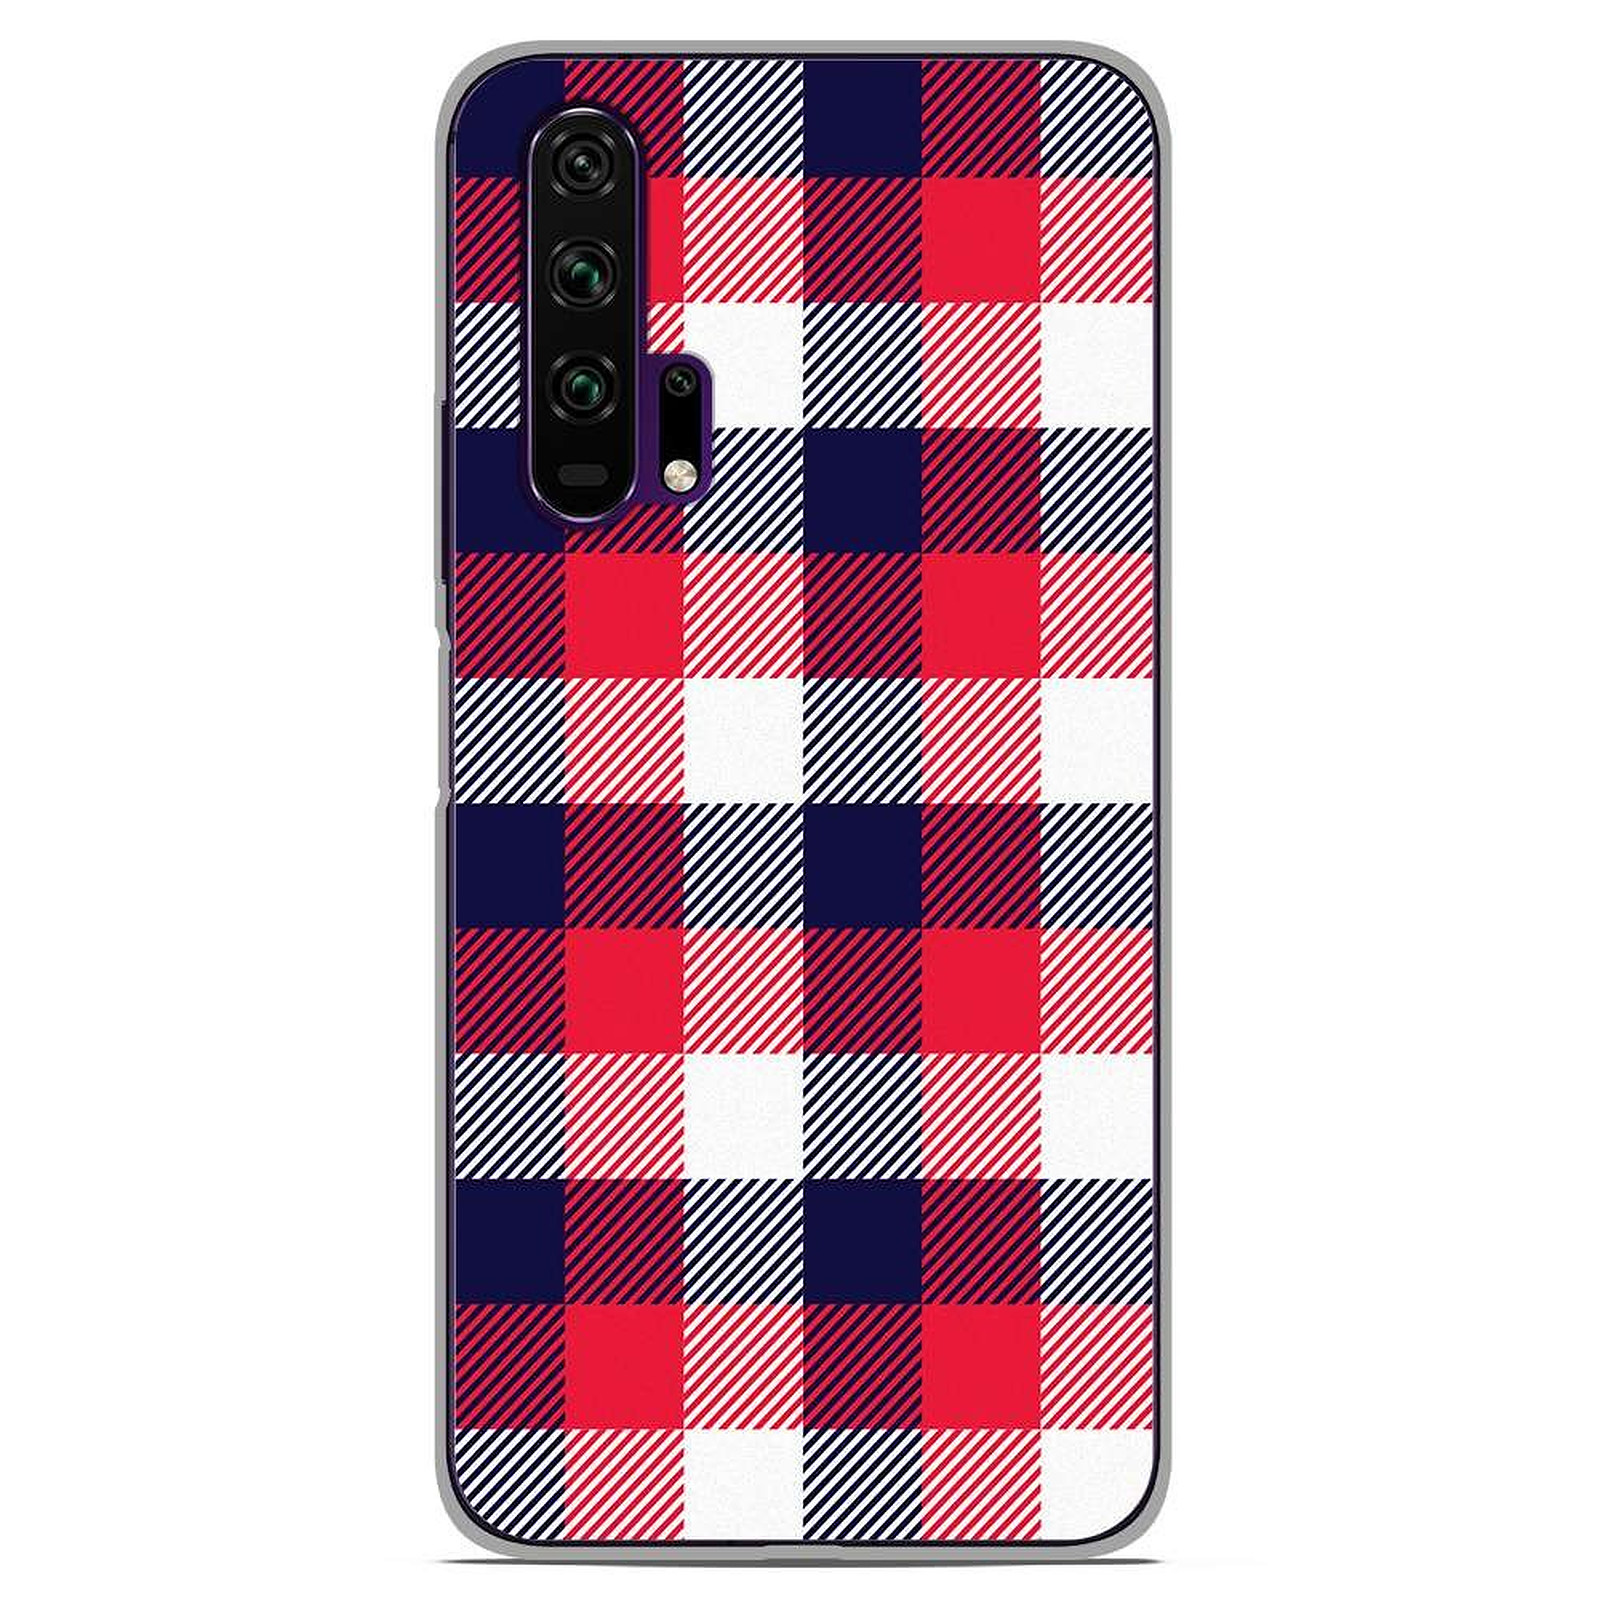 1001 Coques Coque silicone gel Huawei Honor 20 Pro motif Tartan Tricolor - Coque telephone 1001Coques